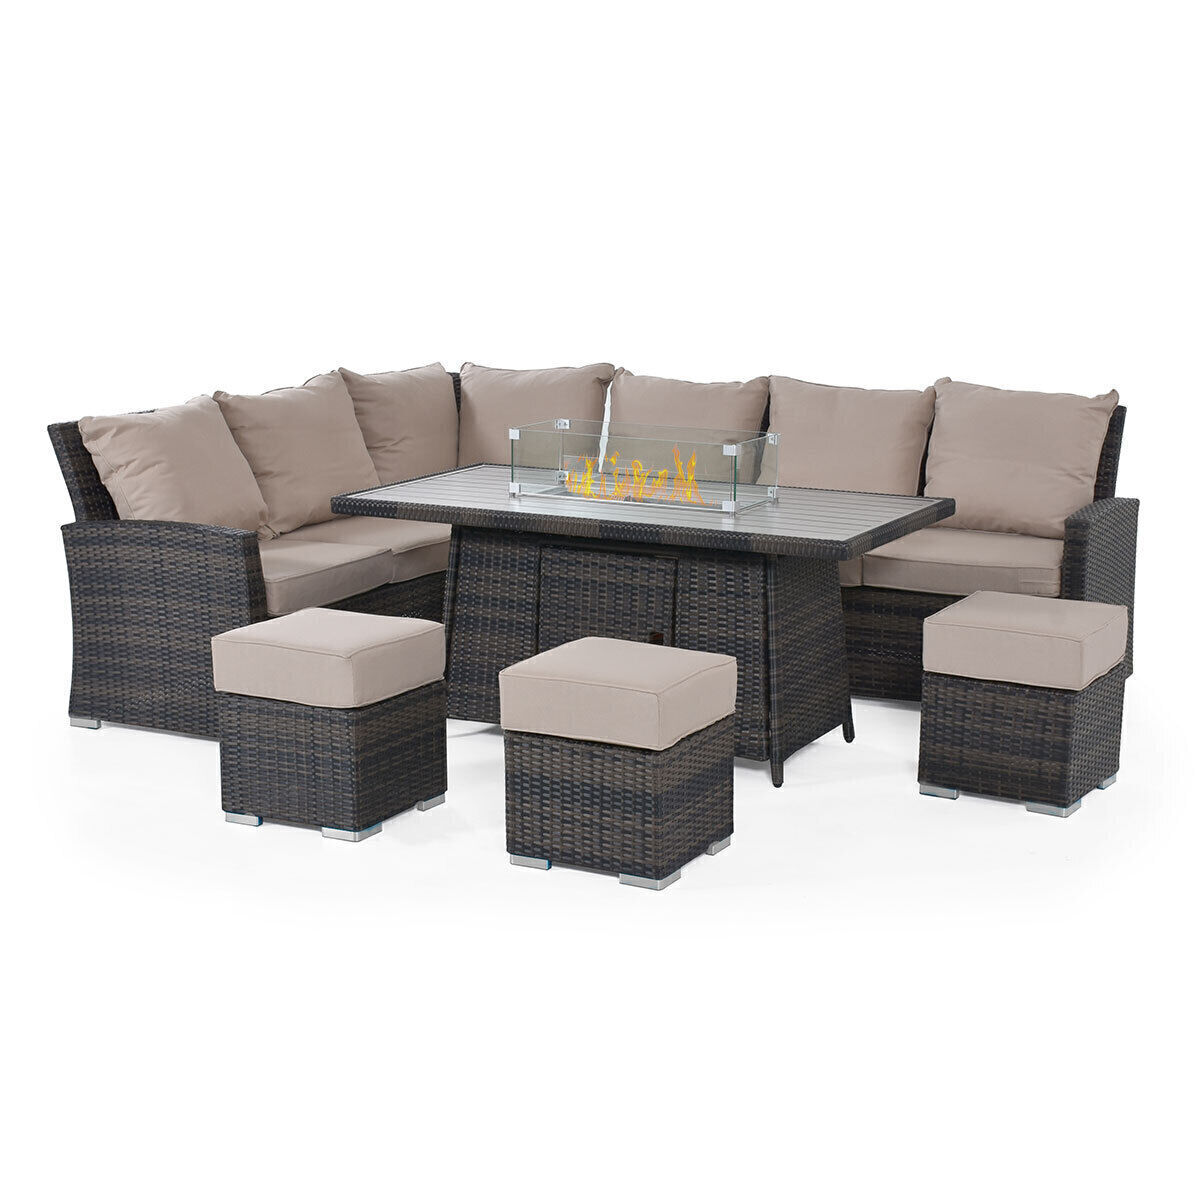 Maze - Kingston Corner Rattan Dining Set with Fire Pit Table - Brown product image